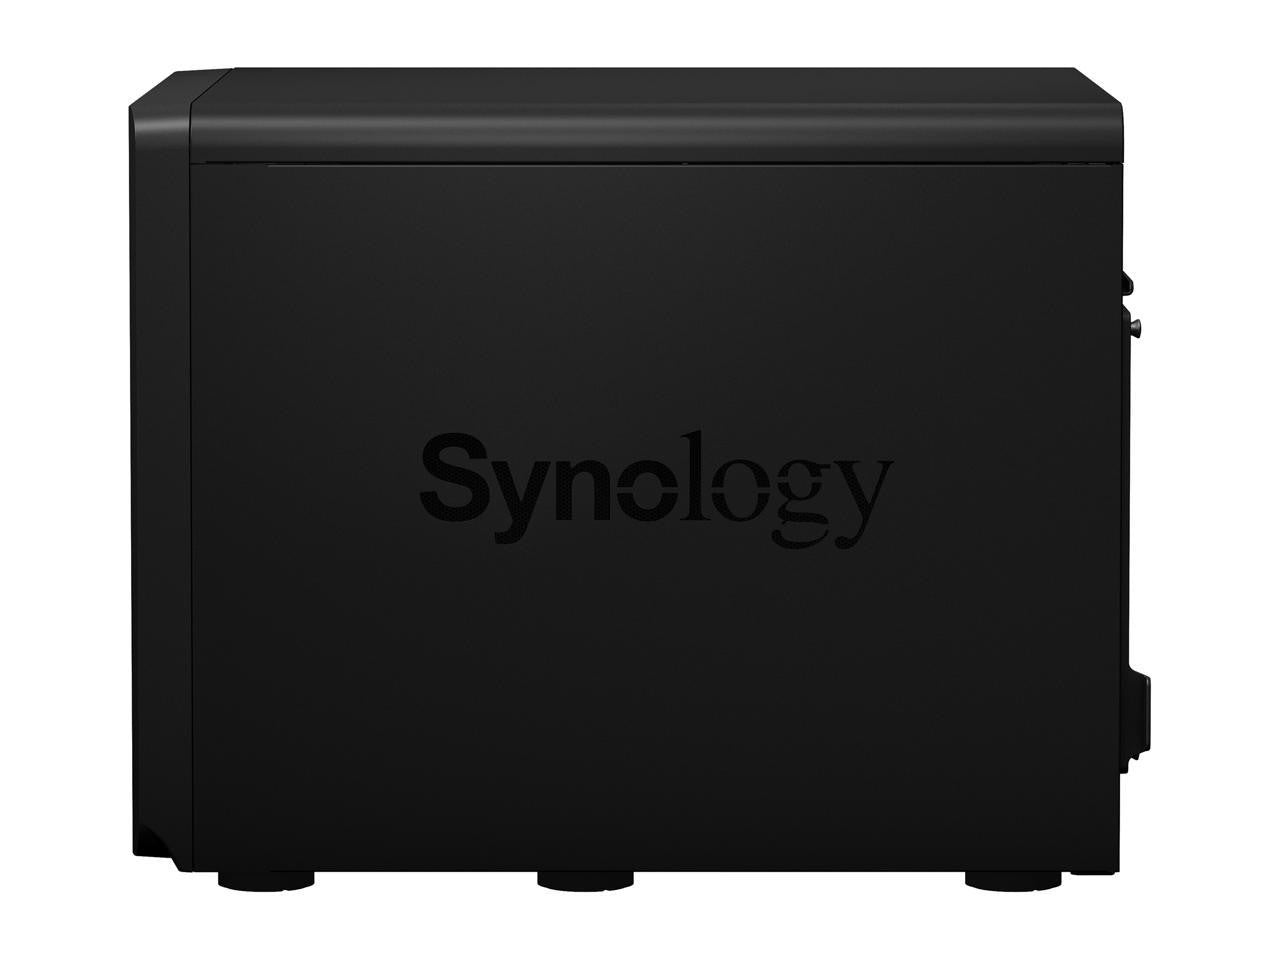 DS3622xs+ 12-BAY DiskStation with 16GB RAM and 192TB (12 x 16TB) of Synology Enterprise Drives